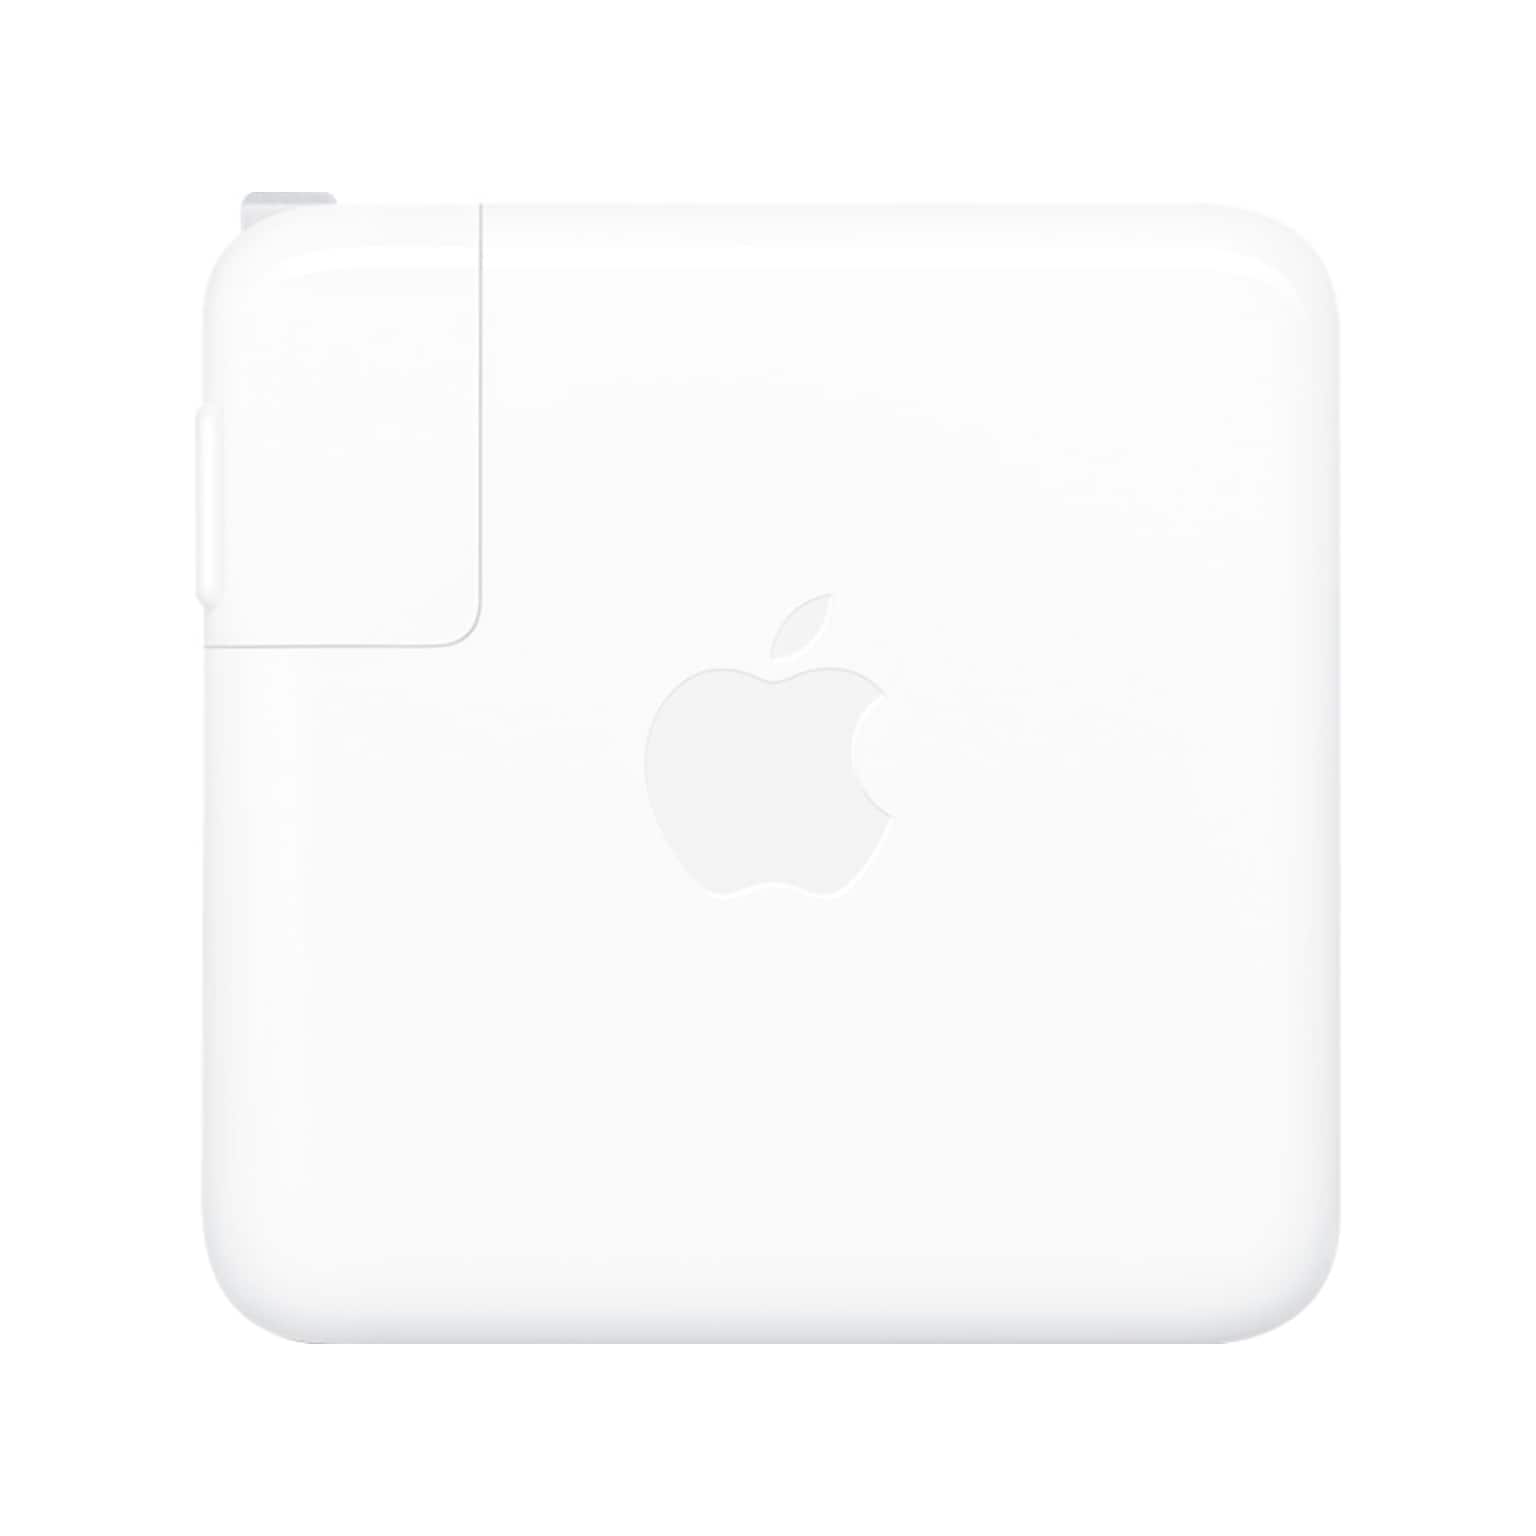 Apple USB Type-C Power Adapter for MacBook Laptops, 67W, White (MKU63AM/A)